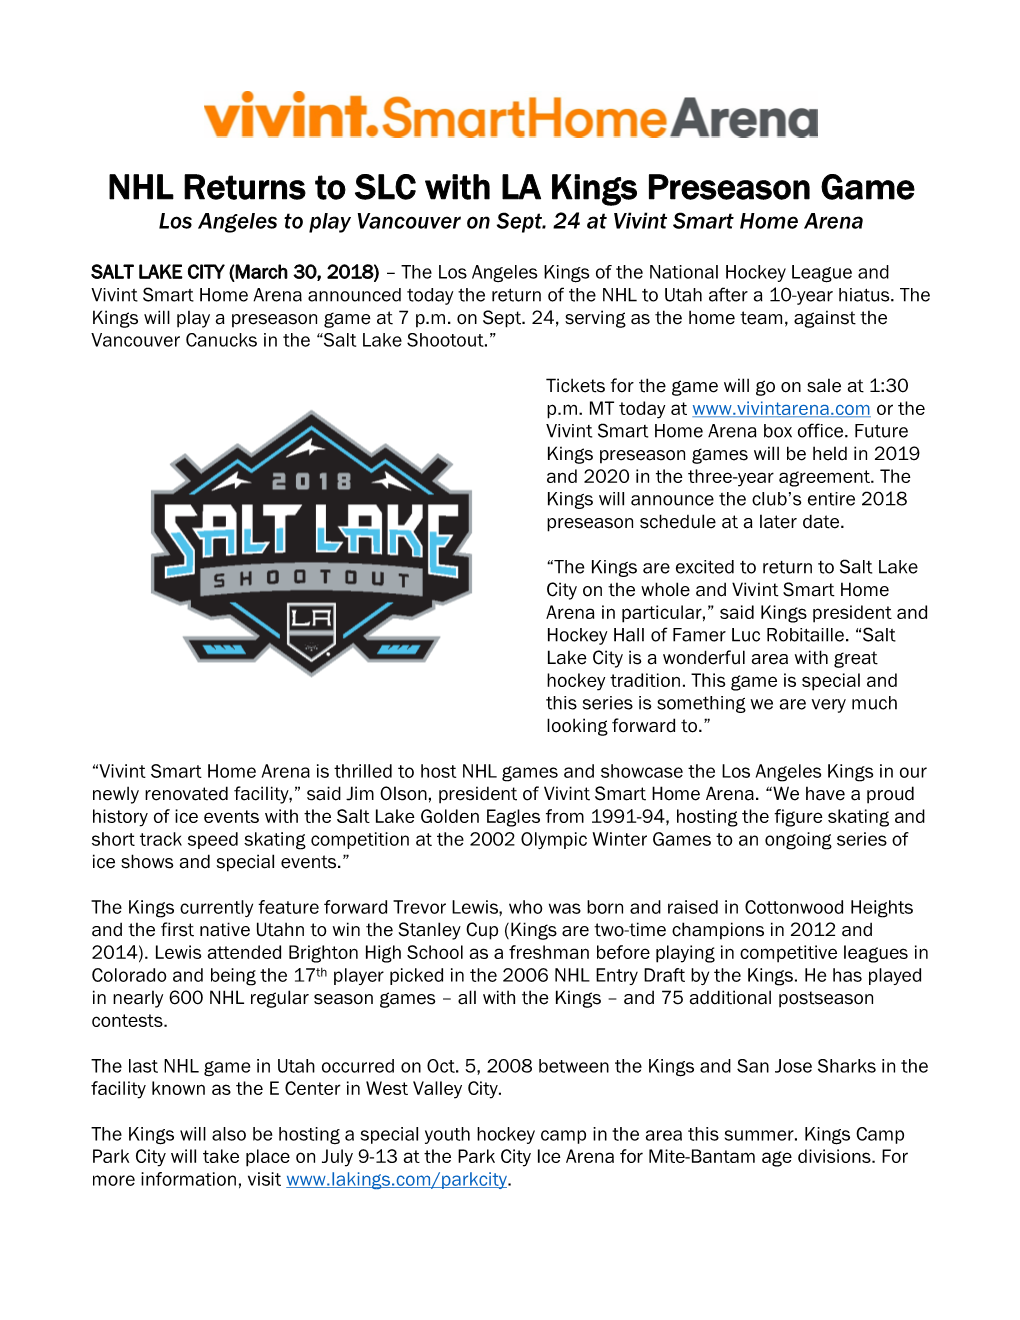 NHL Returns to SLC with LA Kings Preseason Game Los Angeles to Play Vancouver on Sept